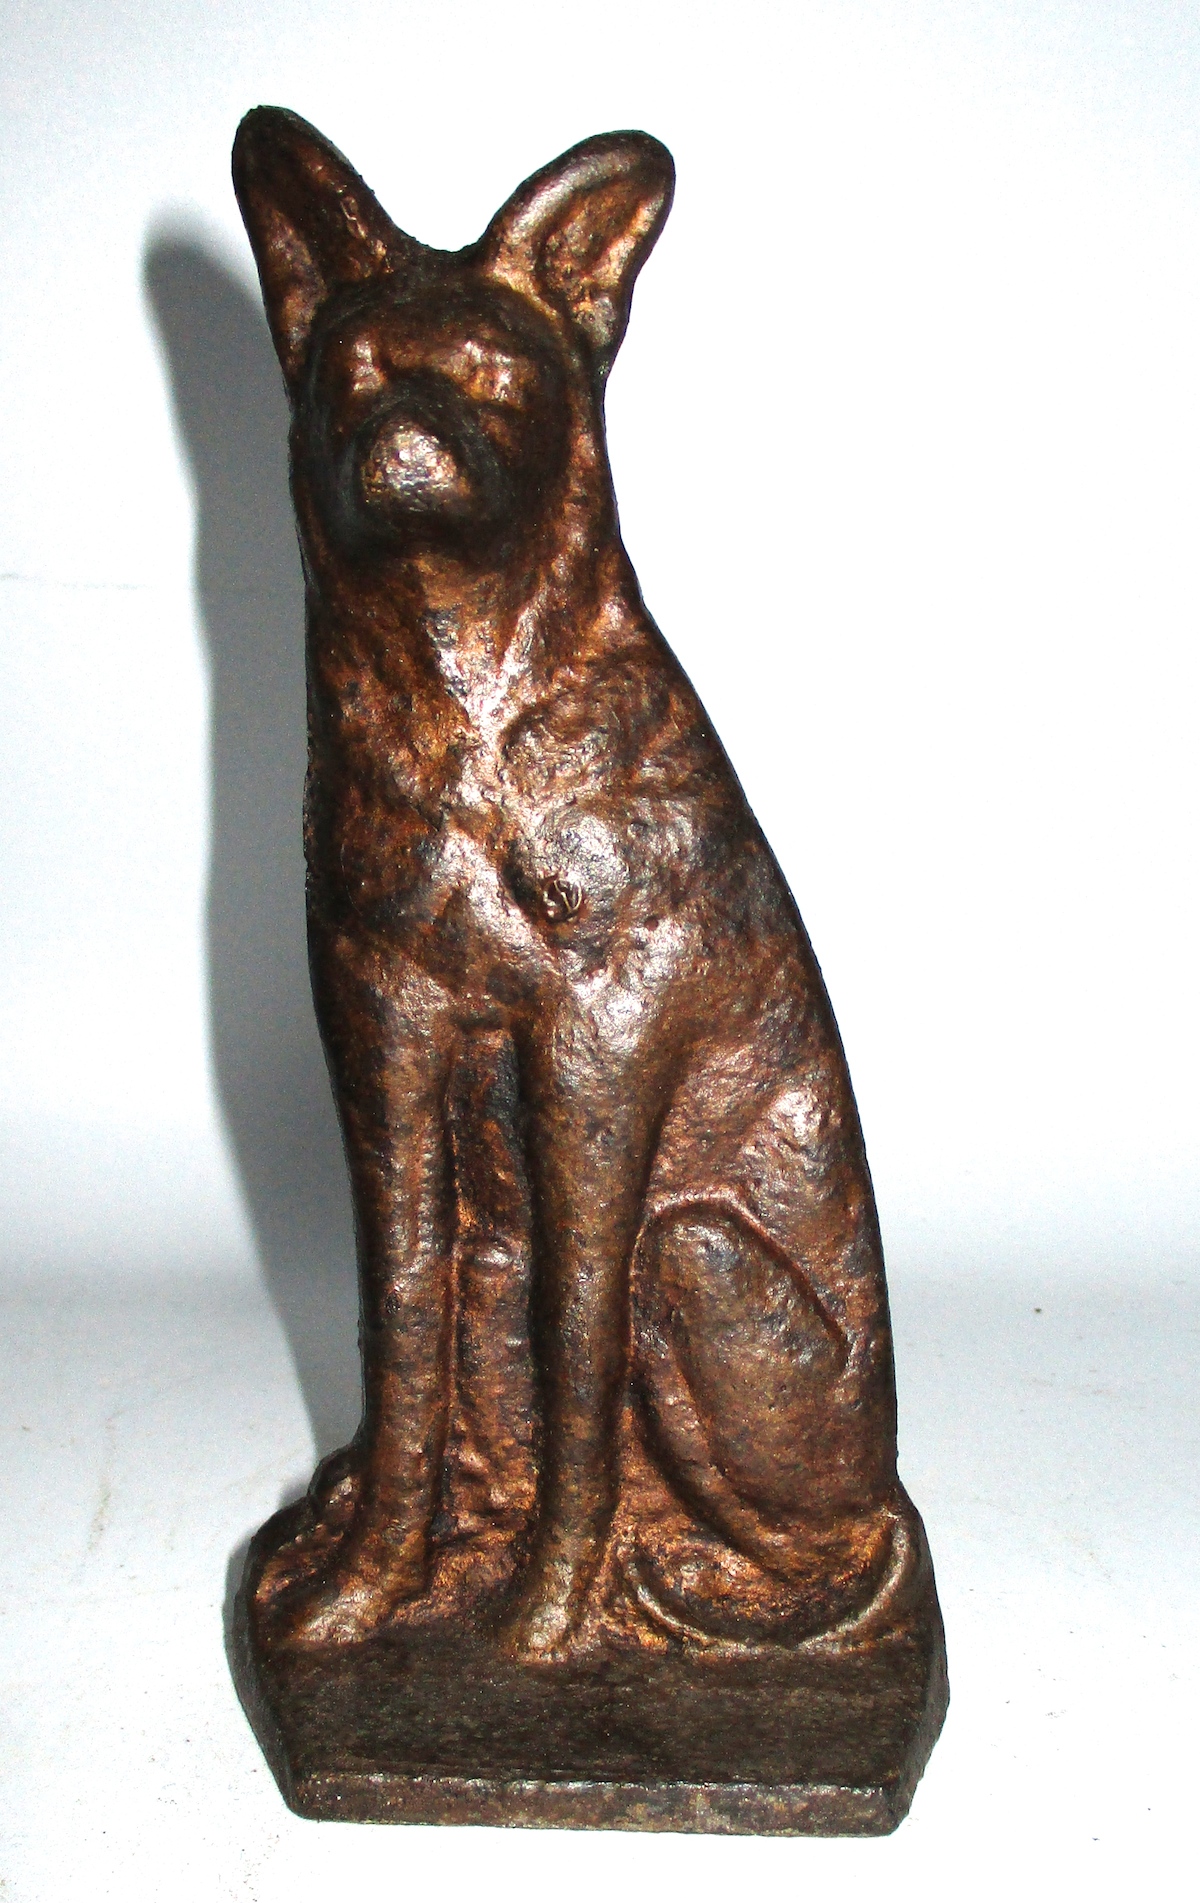 One of a Pair of Cast Iron German Shepherd Bookends (6 1/2" H)